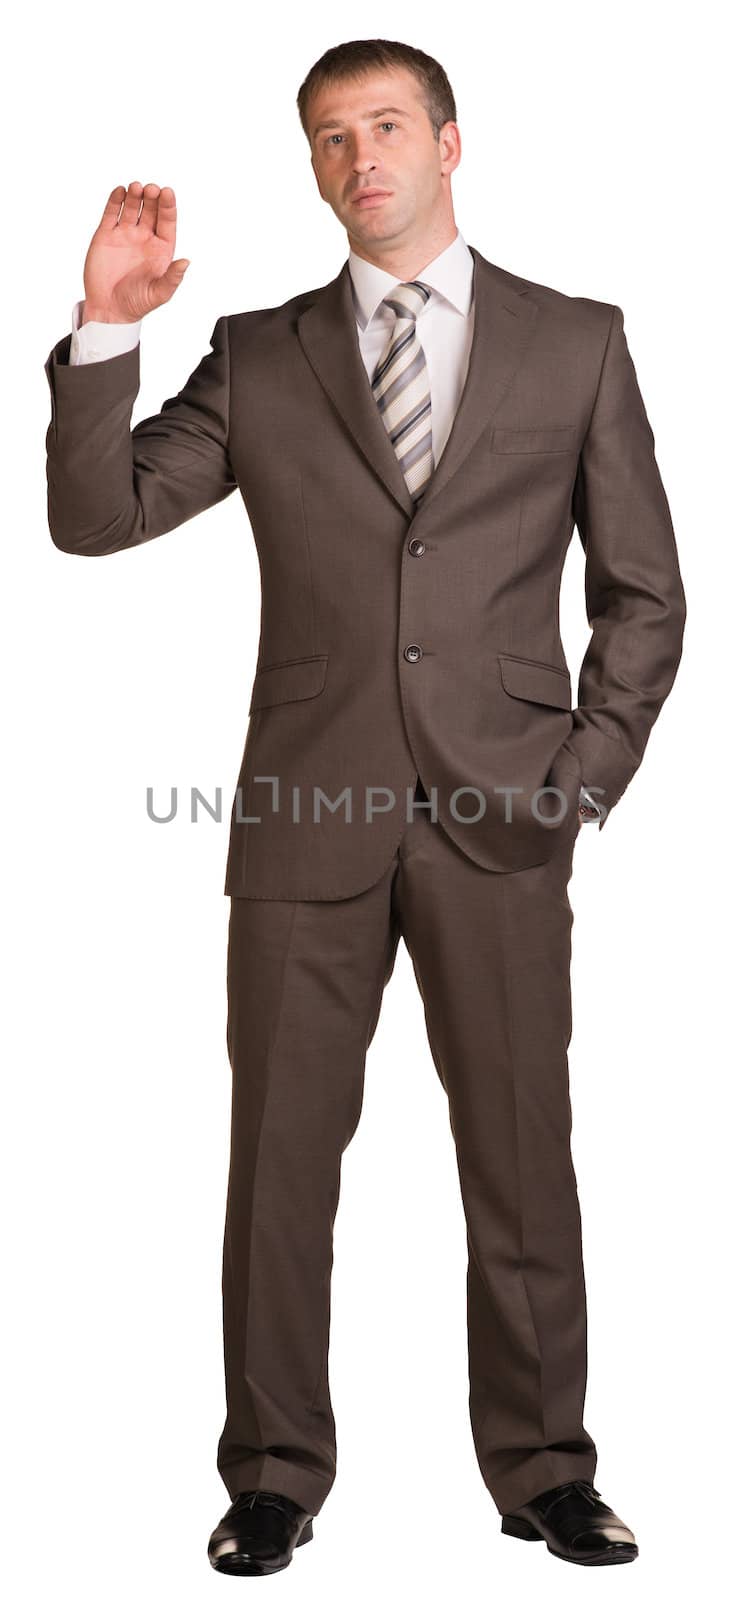 Businessman hold card, mobile phone or other palm gadget. Isolated on white